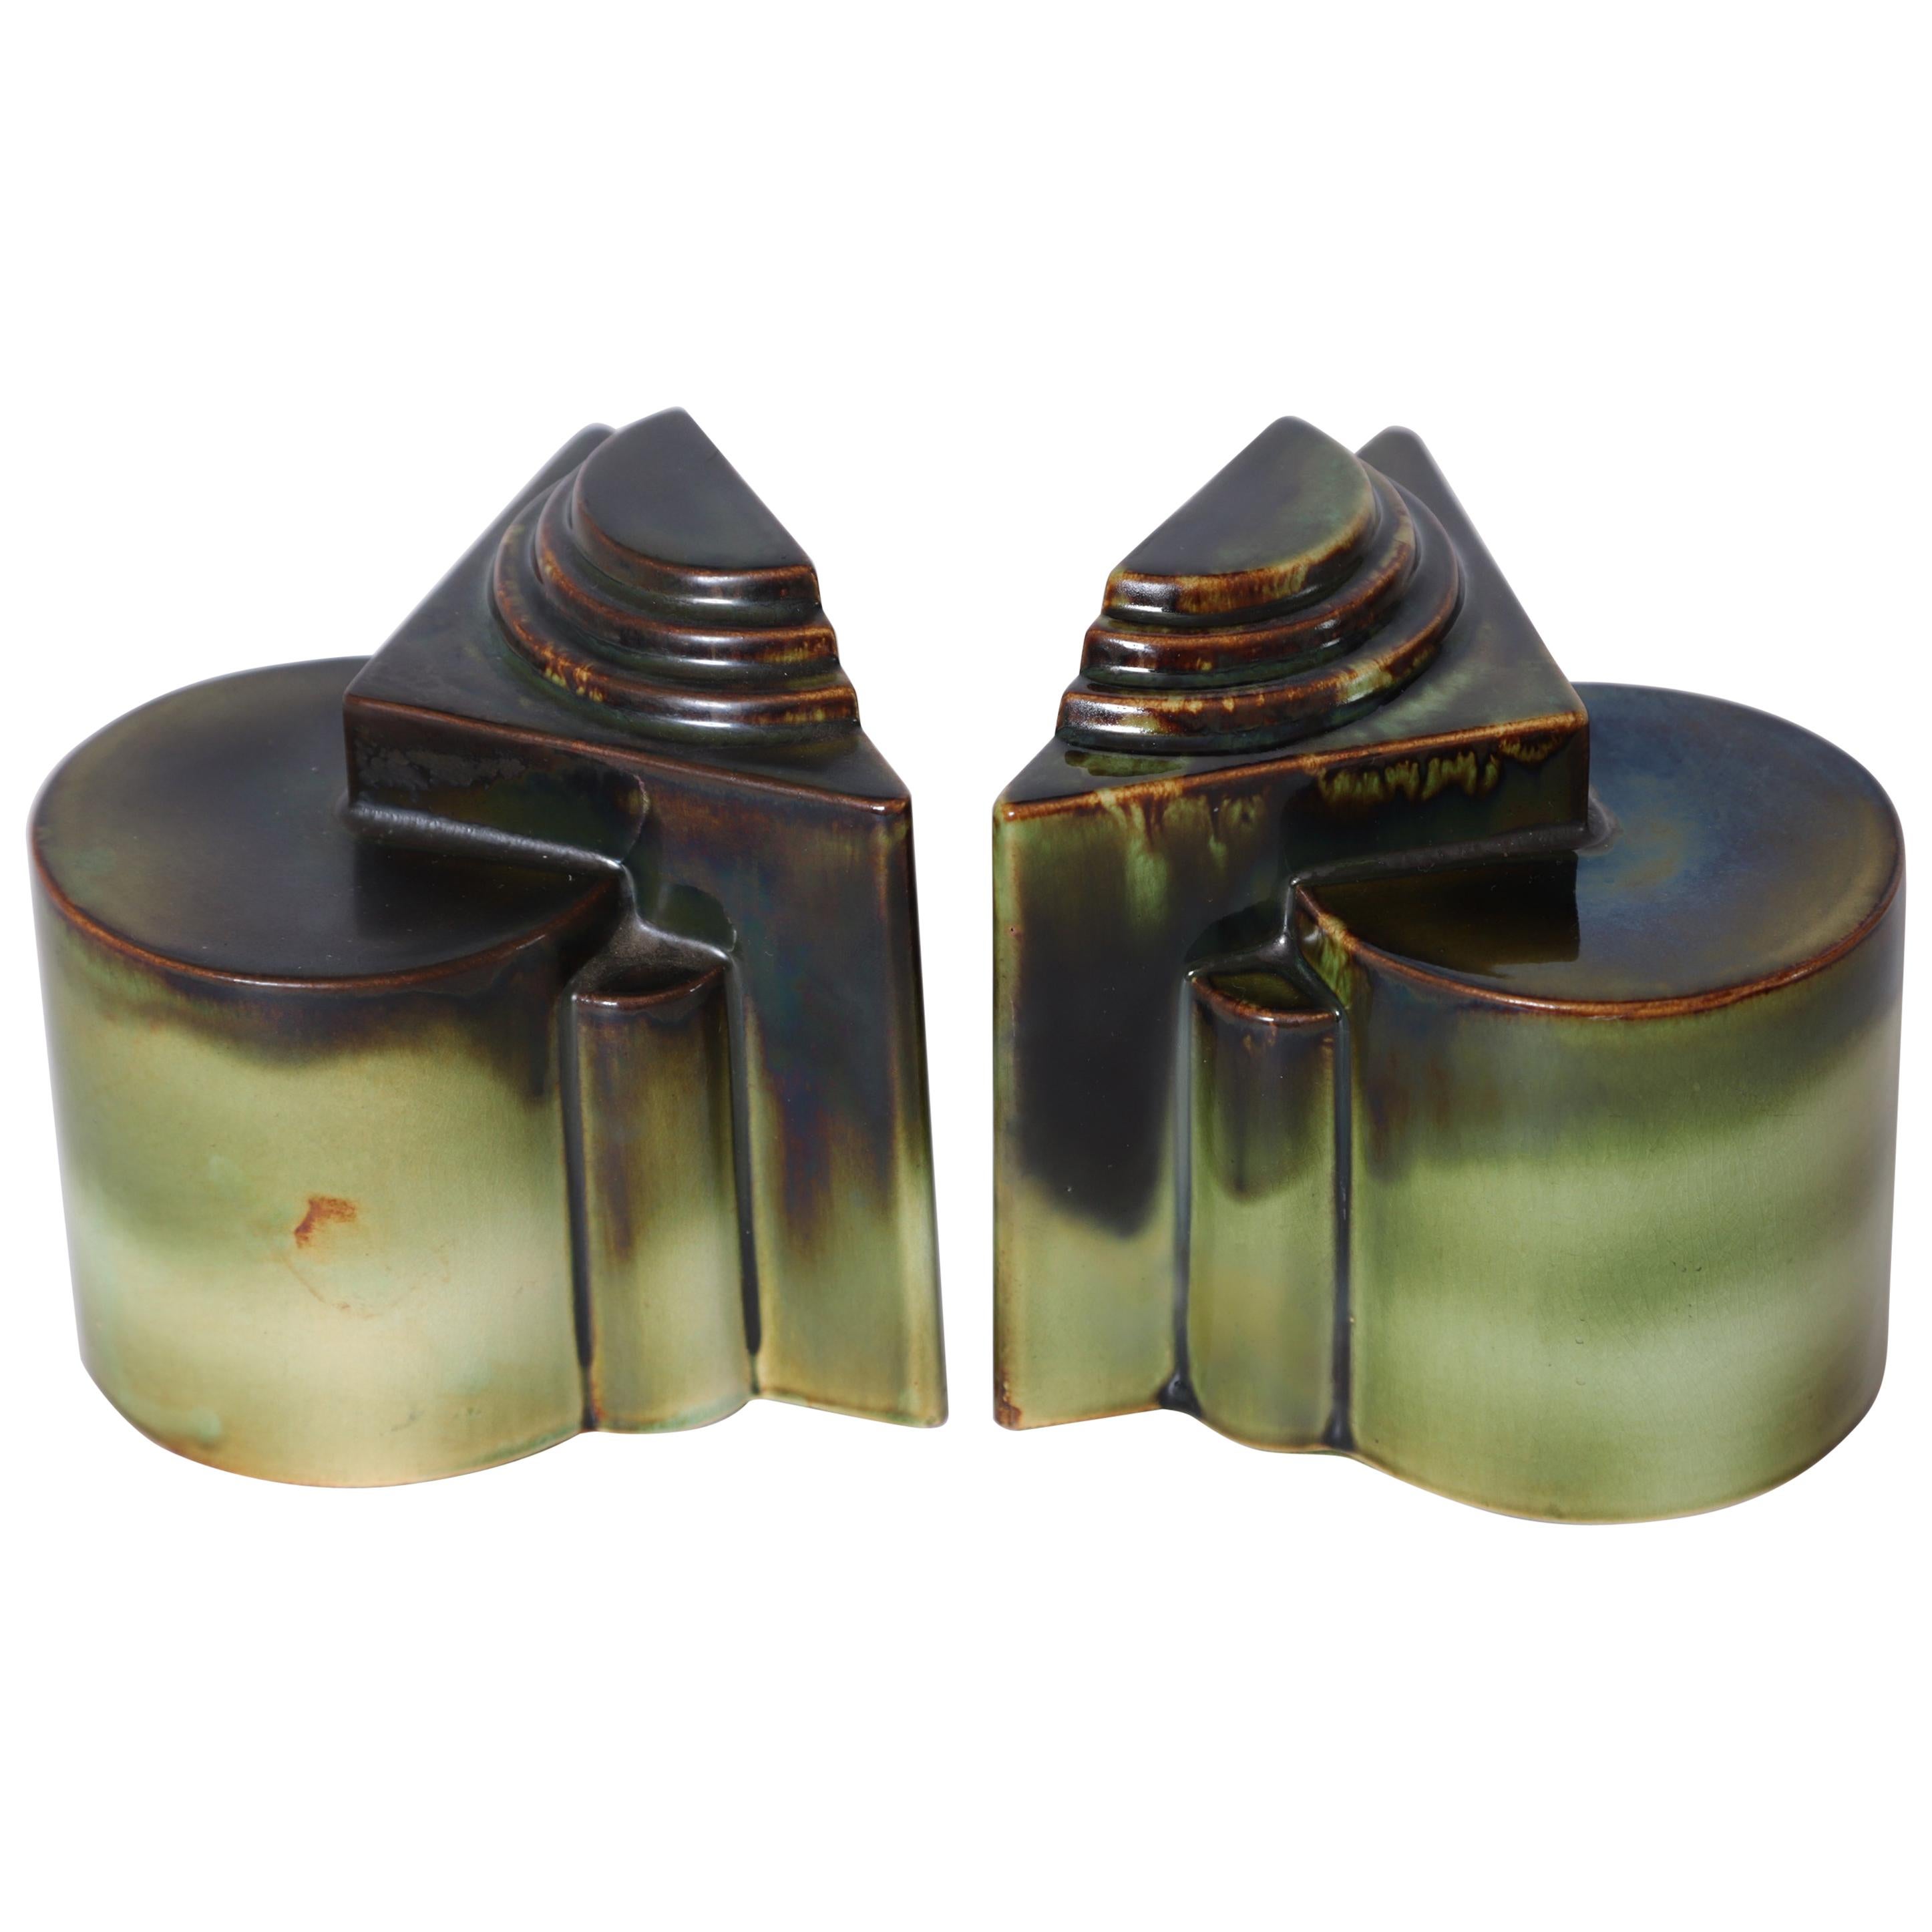 Art Deco Gale Turnbull for Leigh Potters Bookends, circa 1929, Leigh Art Ware